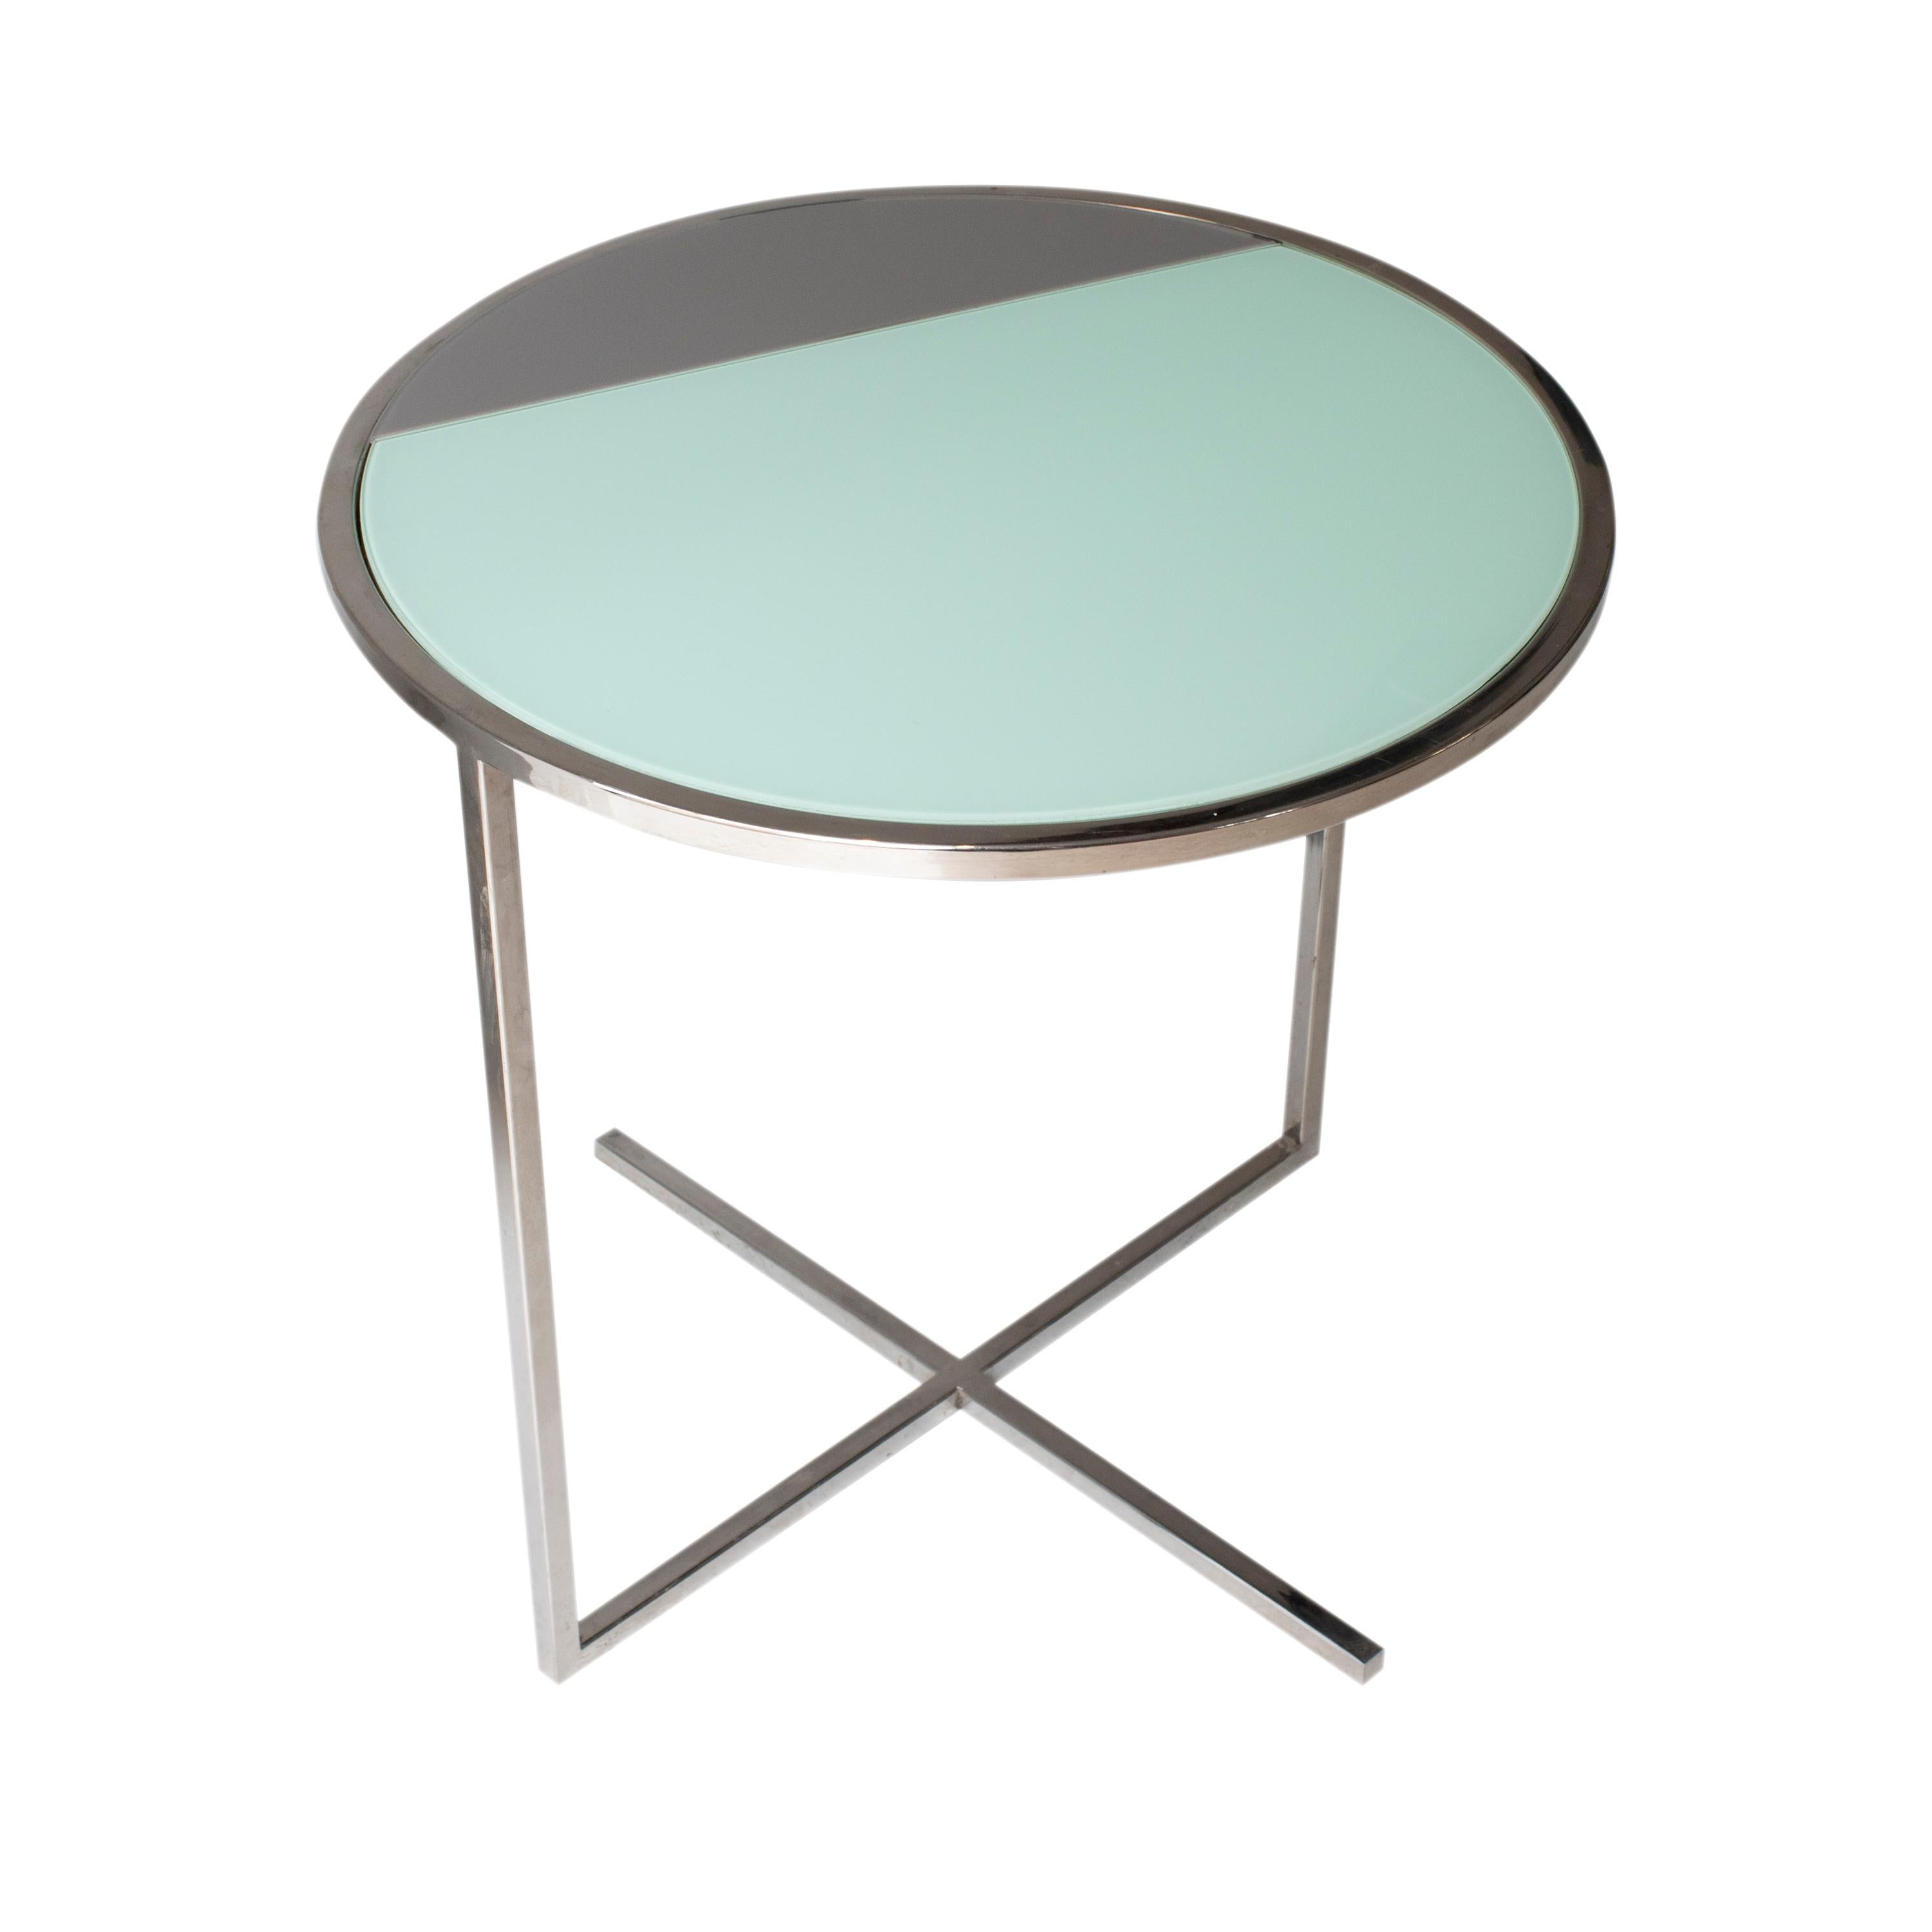 1970´s original side table with a chromed steel structure and an actual glass top designed by IKB191 in green and grey.